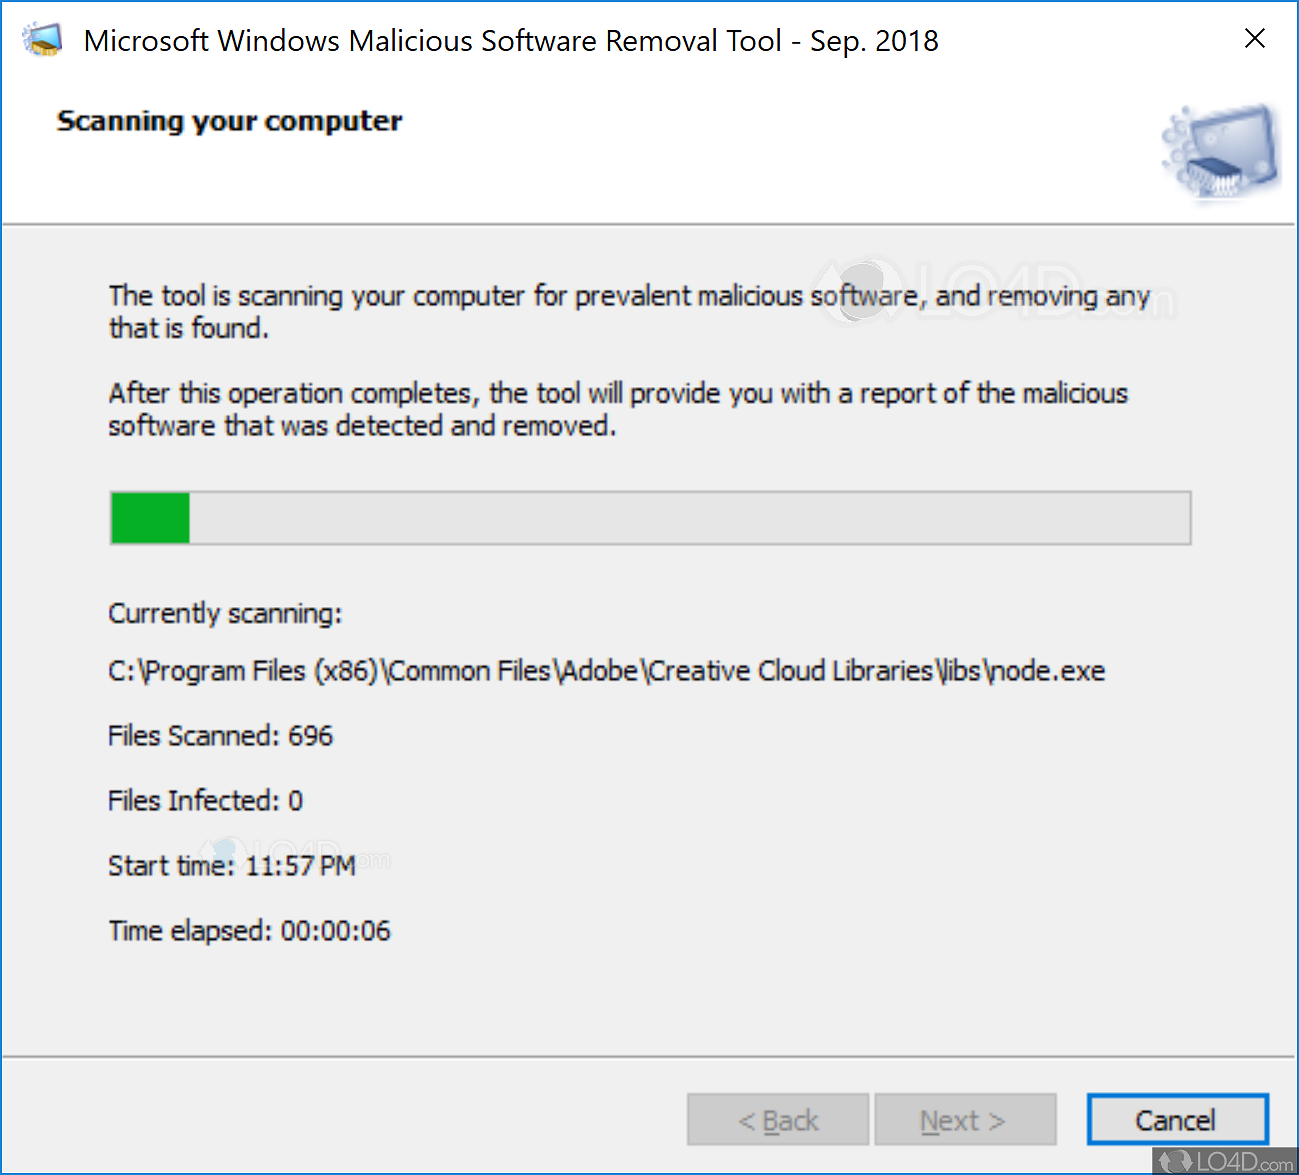 Microsoft Malicious Software Removal Tool instal the last version for ipod